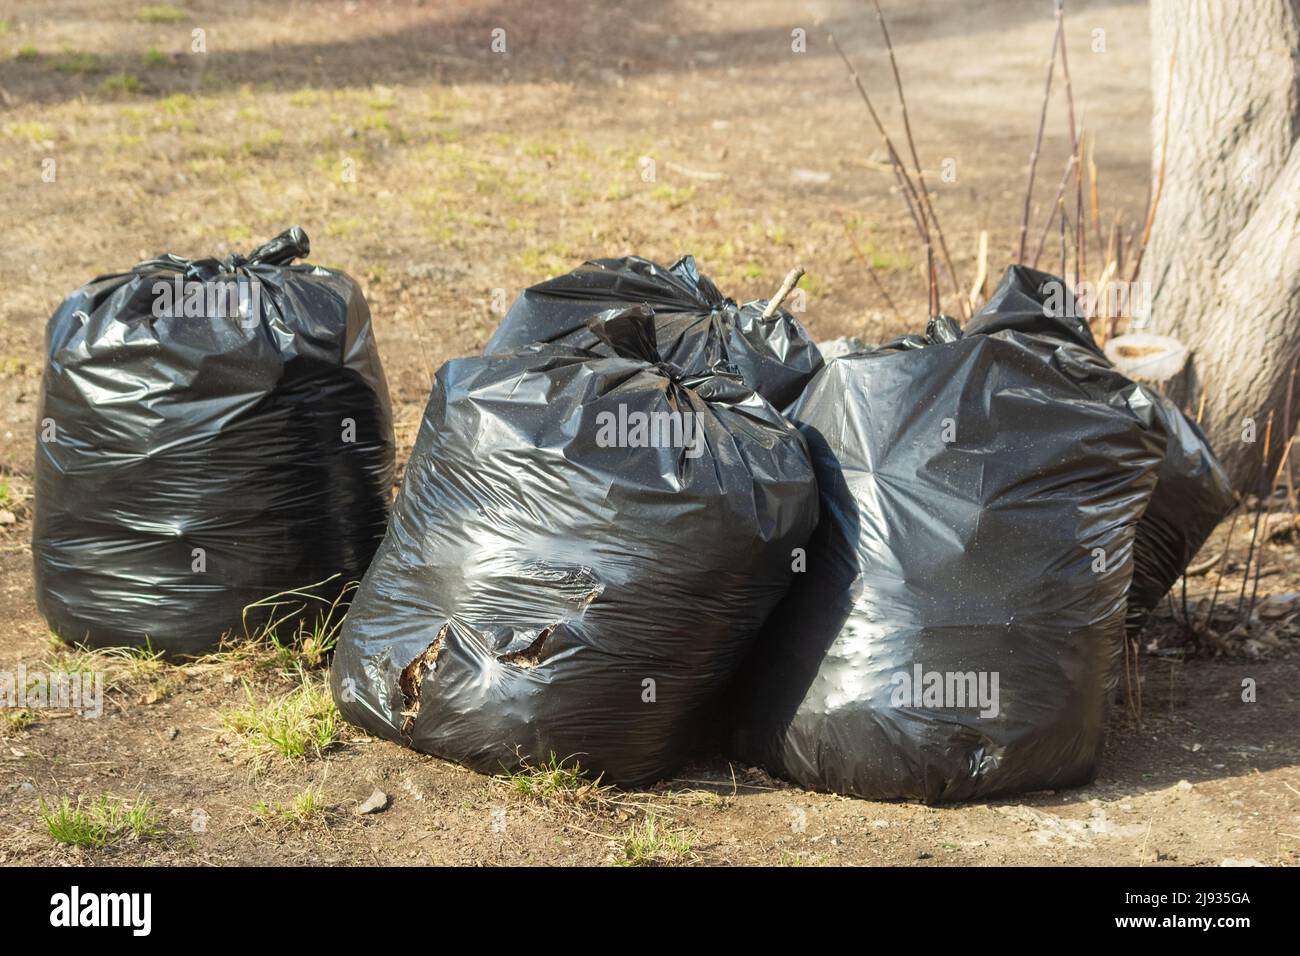 Garbage Bags Large Pile, Plastic Garbage Waste Big Stack, Lot of Waste Bag  and Sky Background, Copy Space Stock Image - Image of dustbin, landfill:  194988041